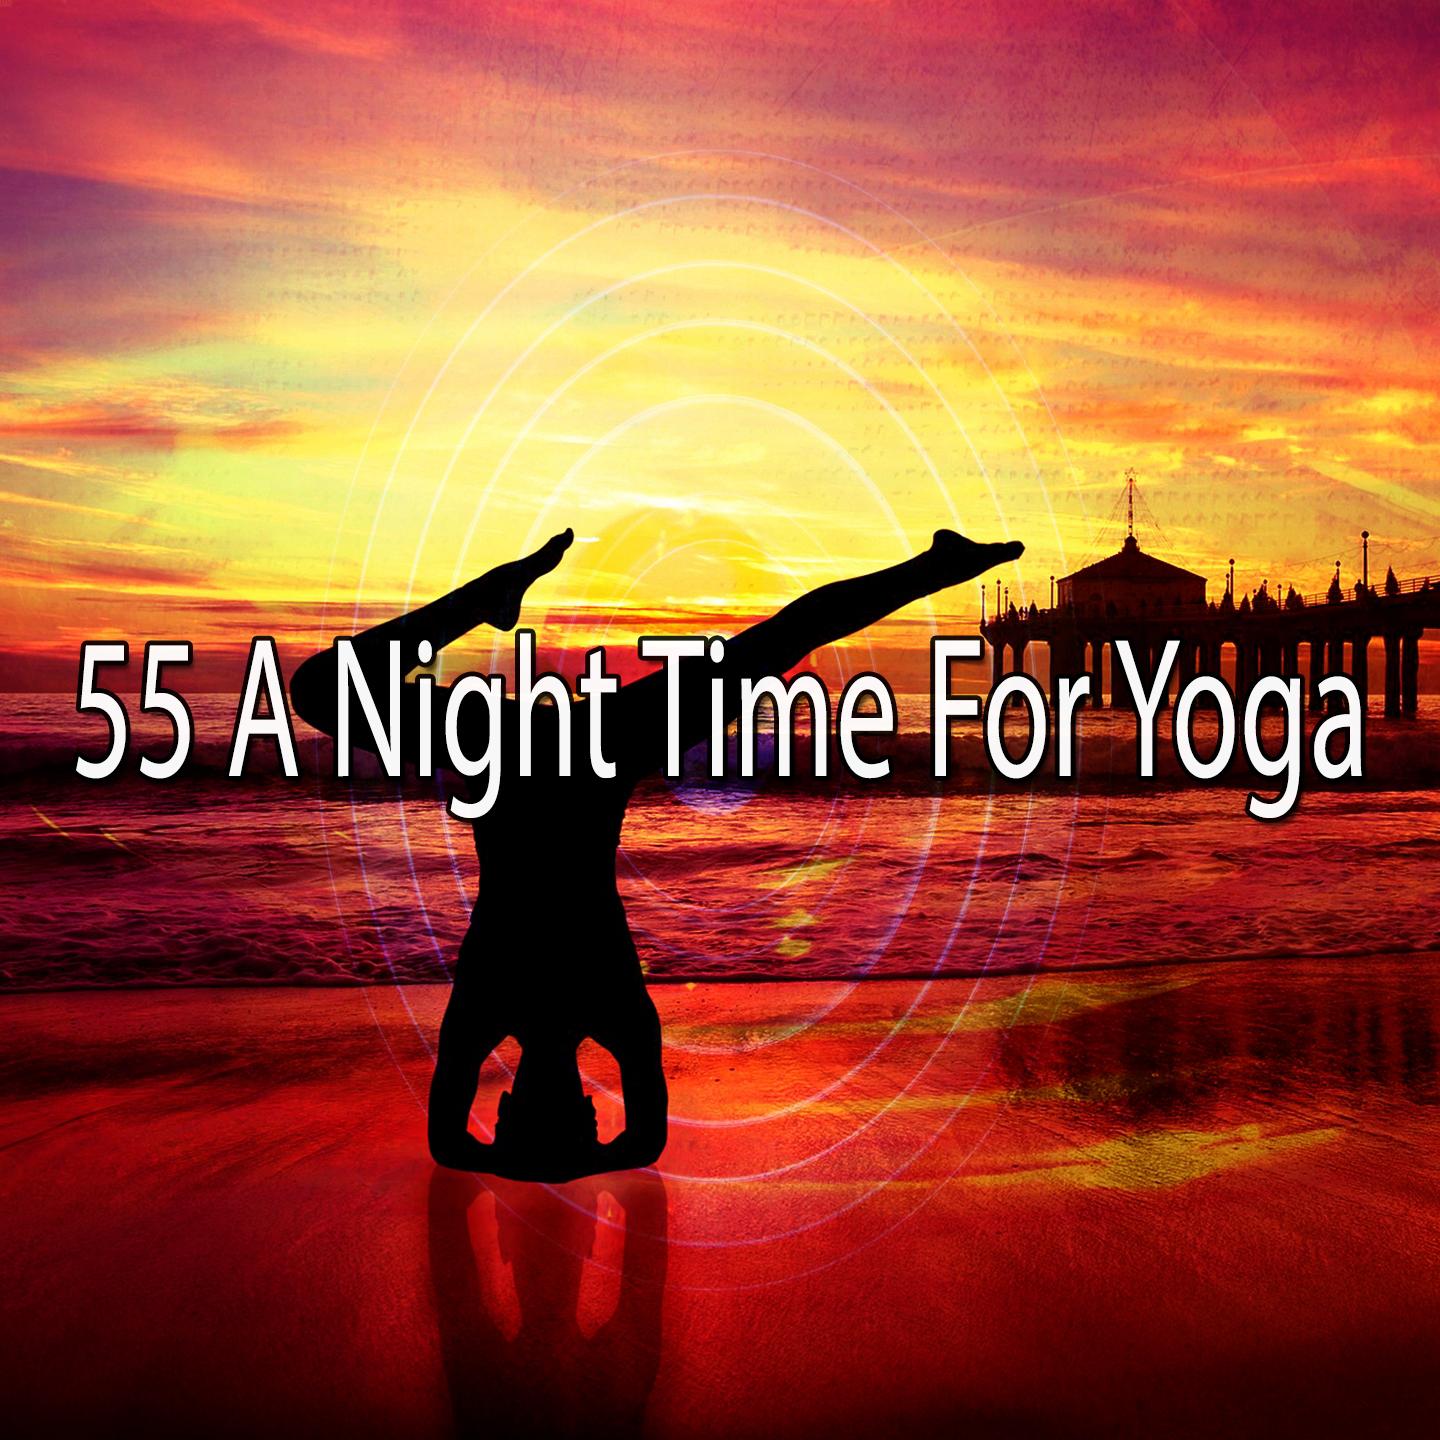 55 A Night Time for Yoga